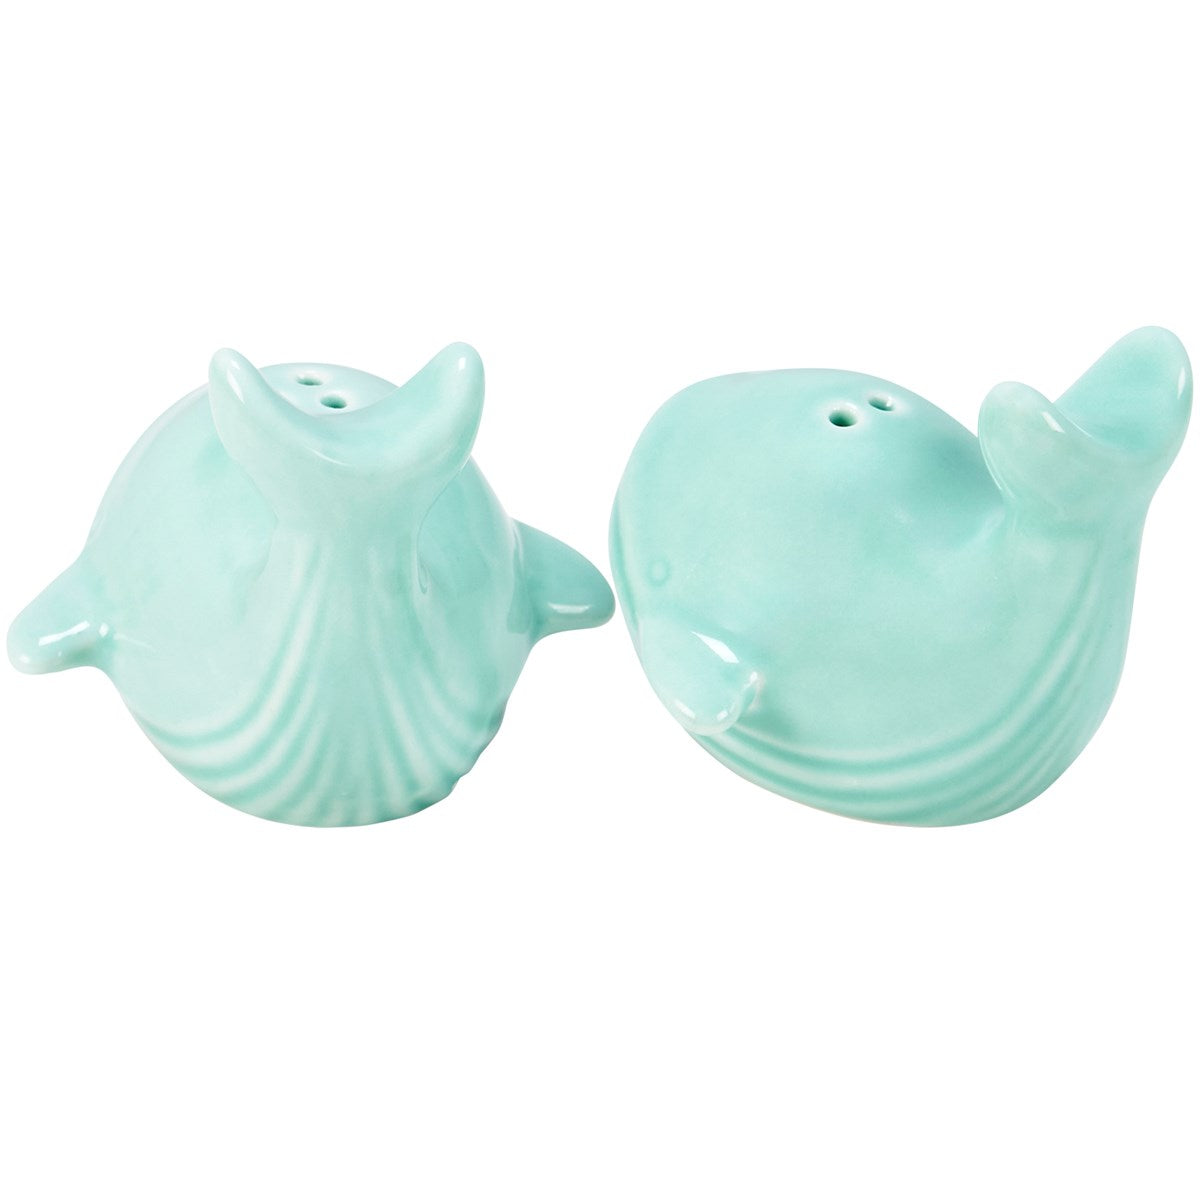 Sea Green Whale Salt And Pepper Shakers